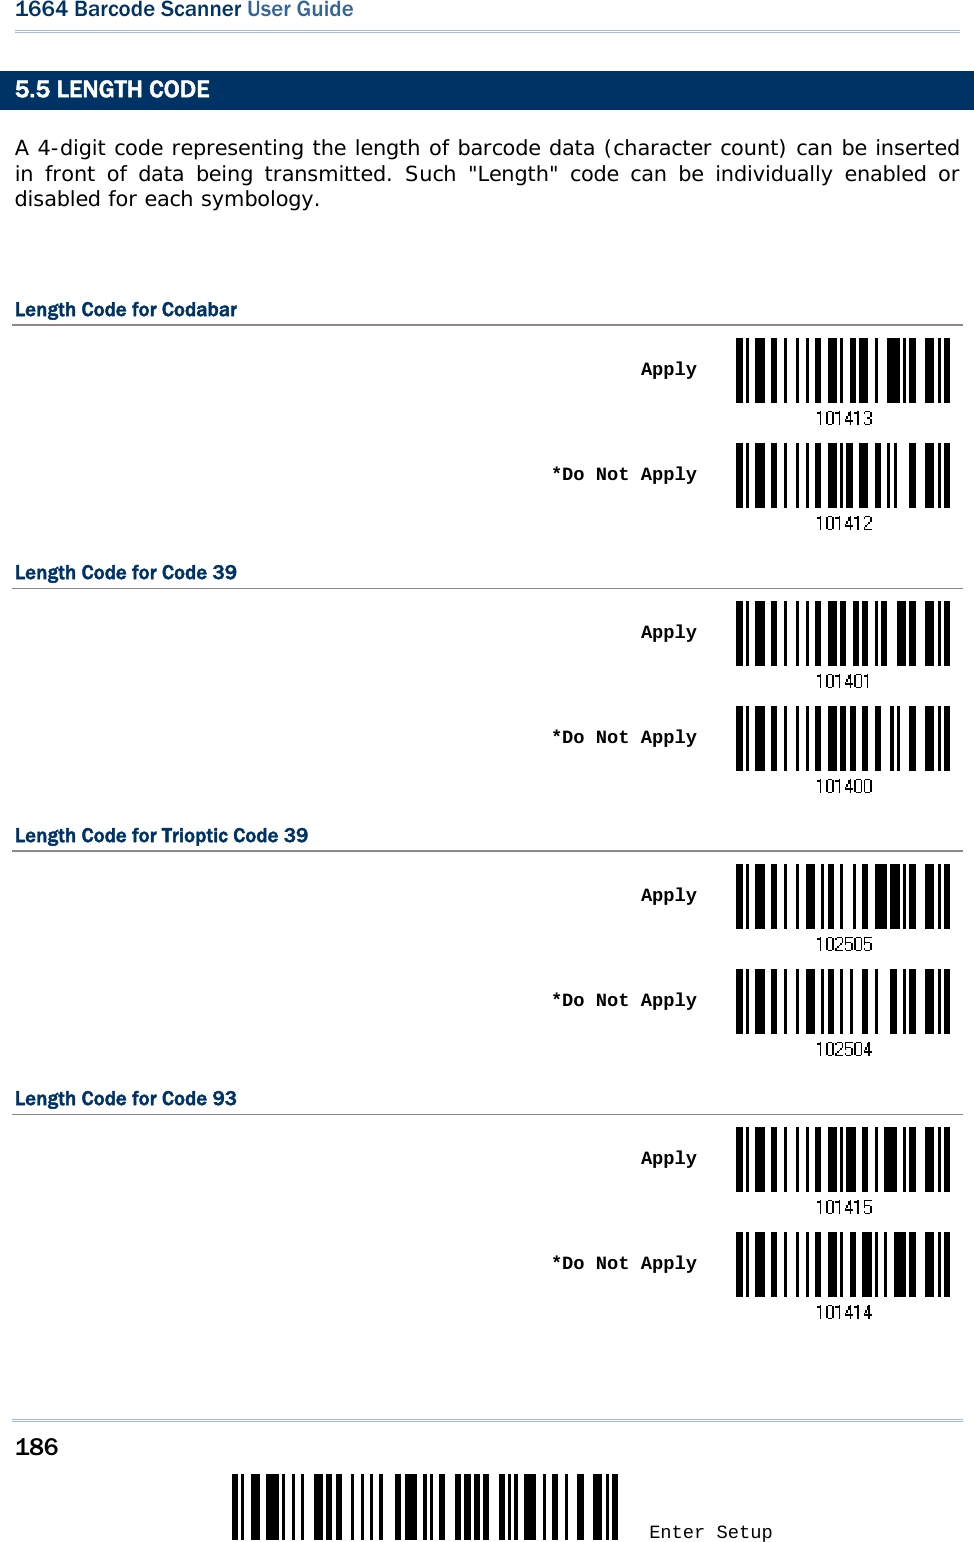 186 Enter Setup 1664 Barcode Scanner User Guide  5.5 LENGTH CODE A 4-digit code representing the length of barcode data (character count) can be inserted in front of data being transmitted. Such &quot;Length&quot; code can be individually enabled or disabled for each symbology.  Length Code for Codabar  Apply *Do Not ApplyLength Code for Code 39  Apply *Do Not ApplyLength Code for Trioptic Code 39  Apply *Do Not ApplyLength Code for Code 93  Apply *Do Not Apply 